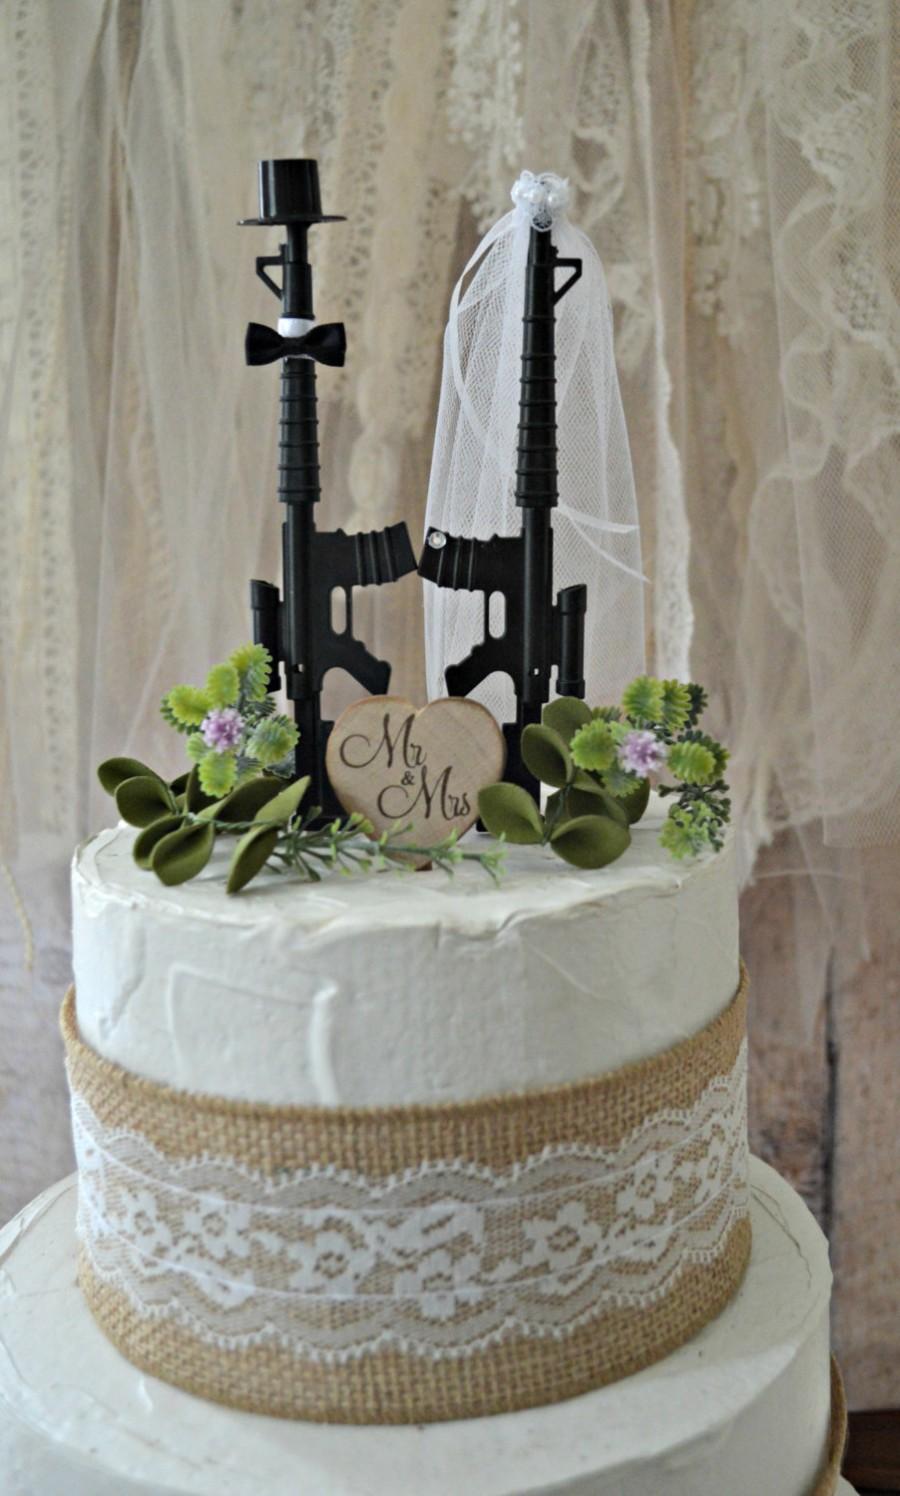 Wedding - Machine gun weapon wedding cake topper army police themed hunting groom's cake Mr & Mrs sing the hunt is over gun decorations military sign